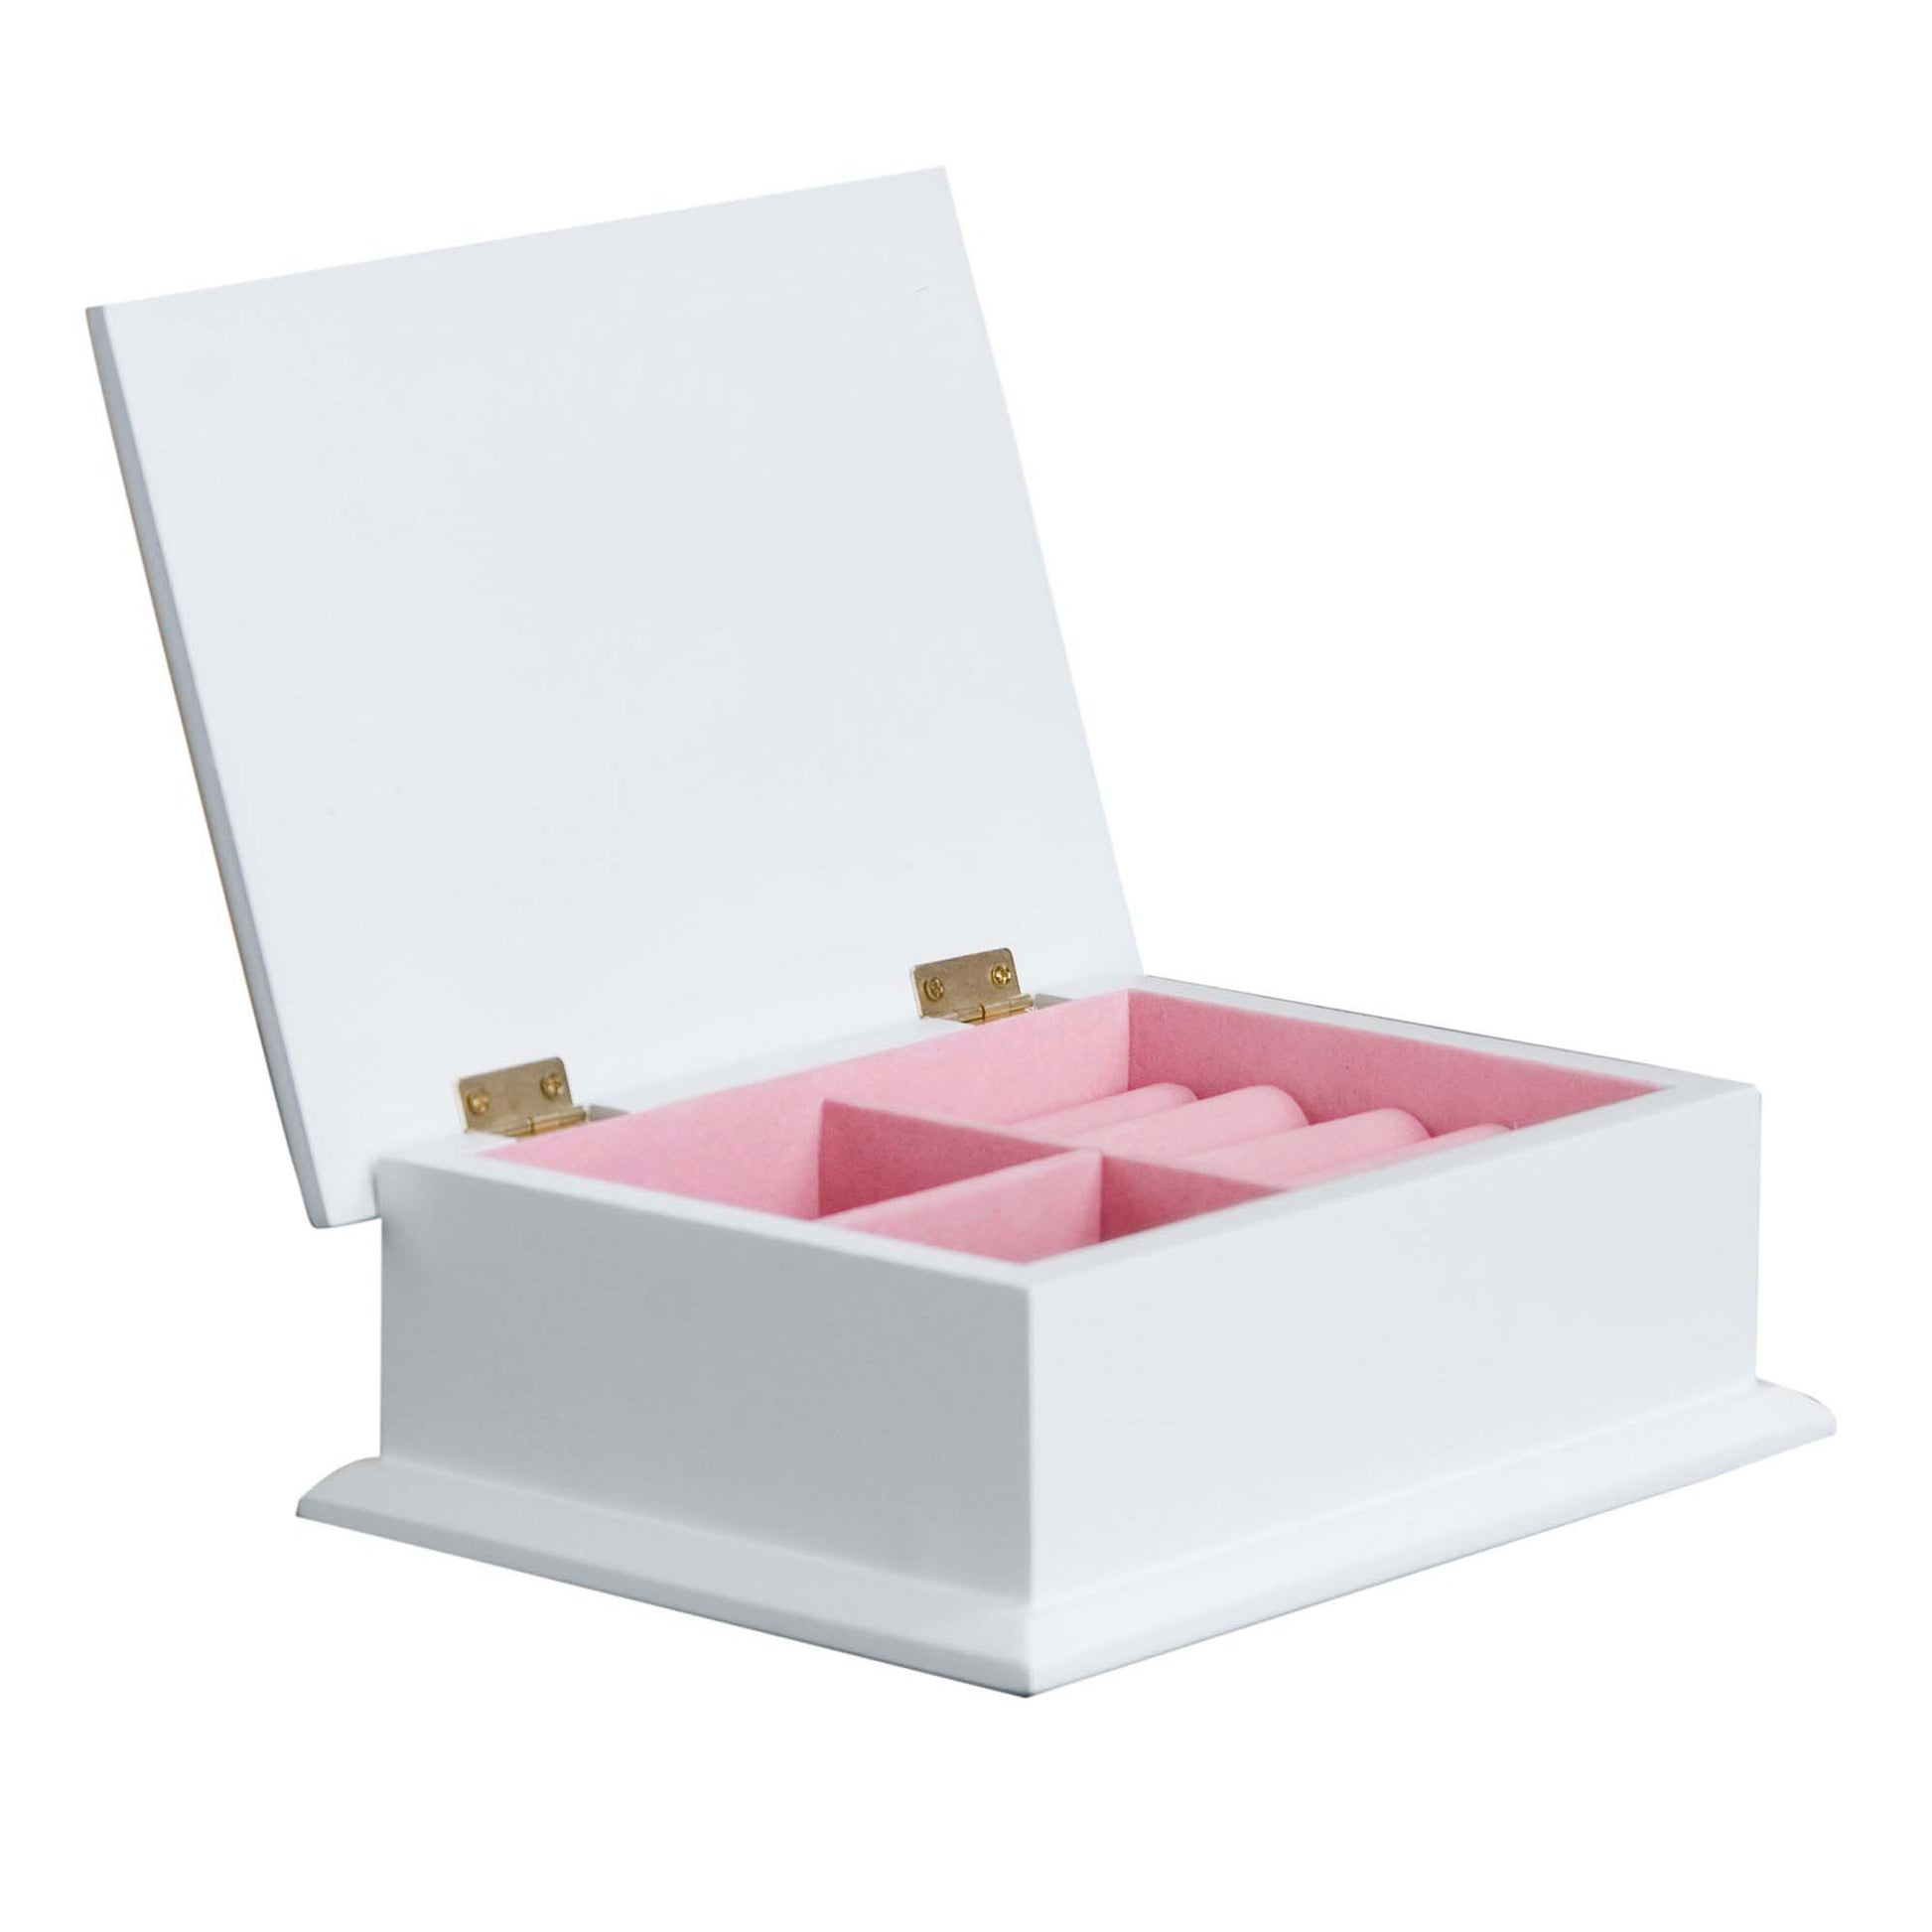 Personalized Lift Top Jewelry Box with Pink Puppy design